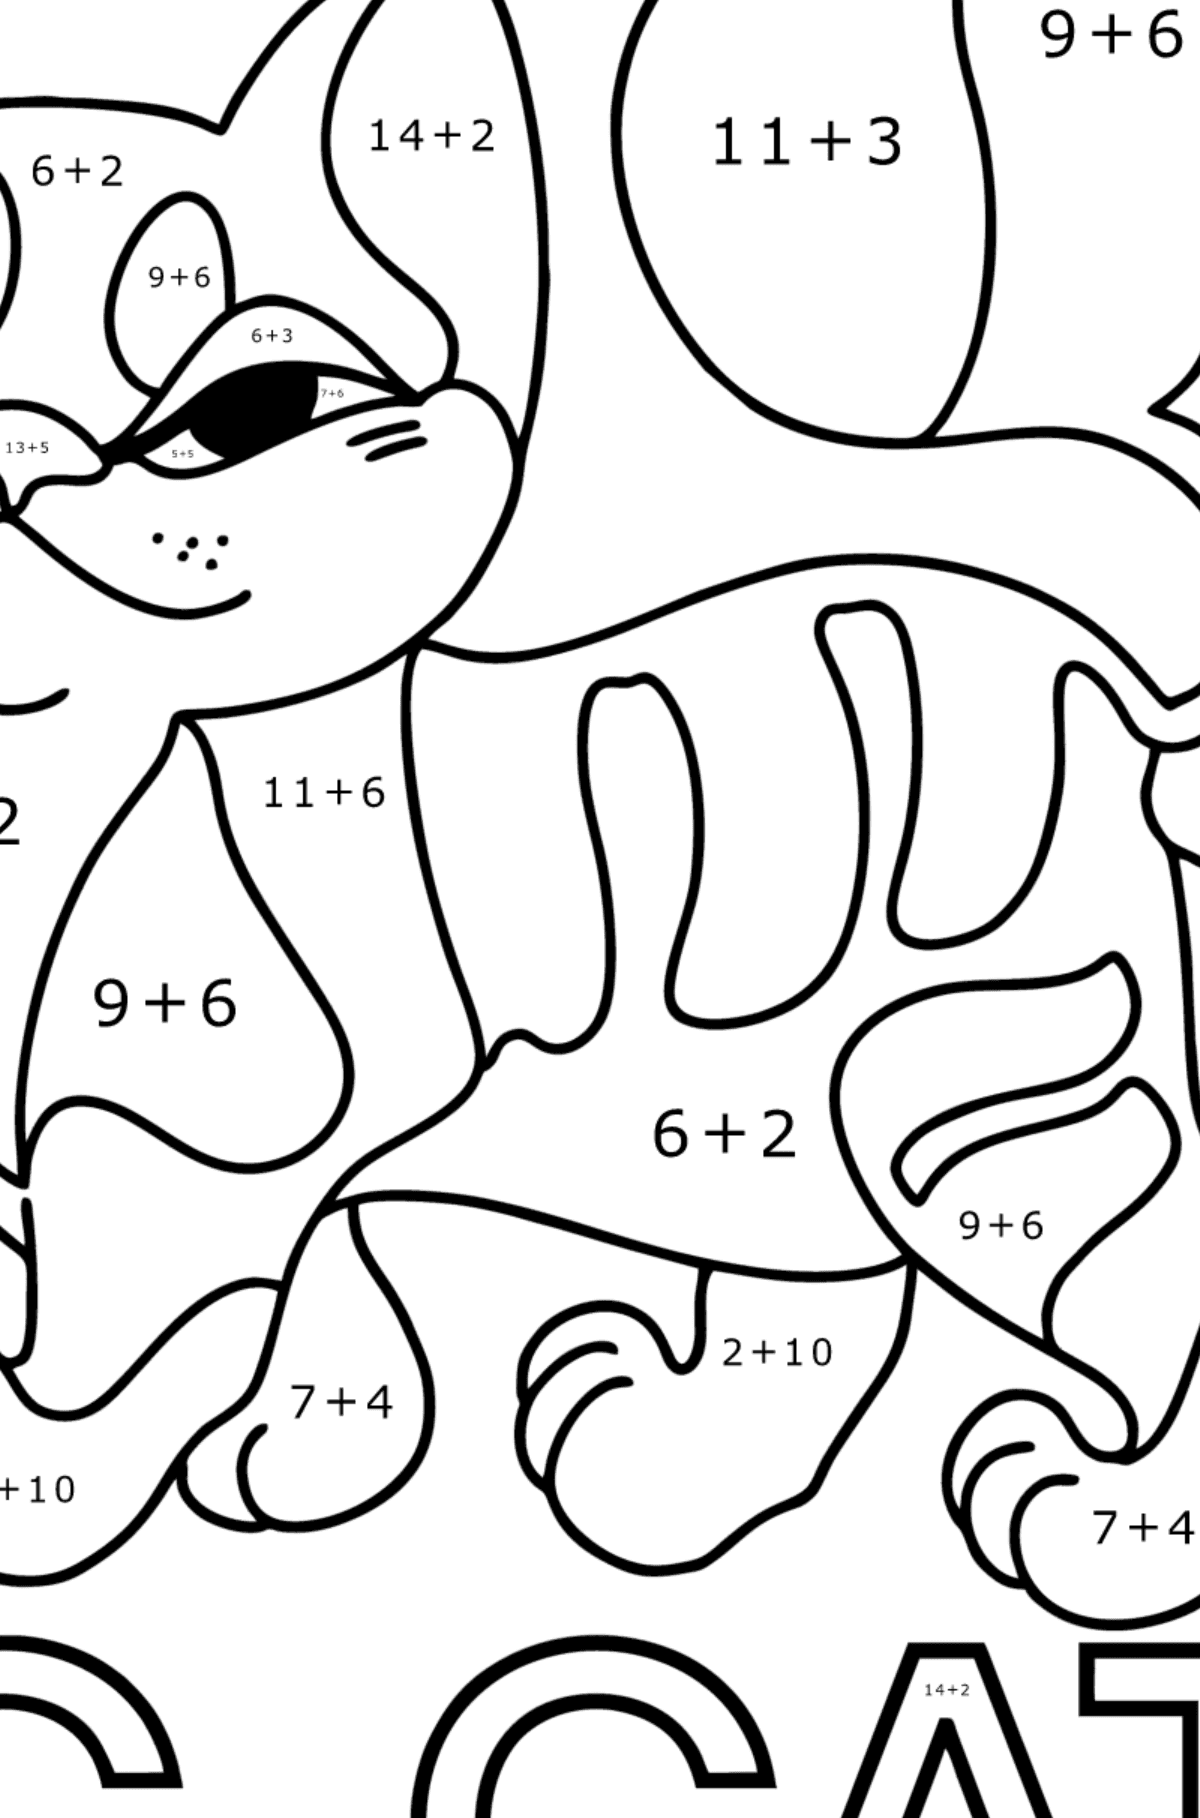 English Letter C coloring page - Math Coloring - Addition for Kids